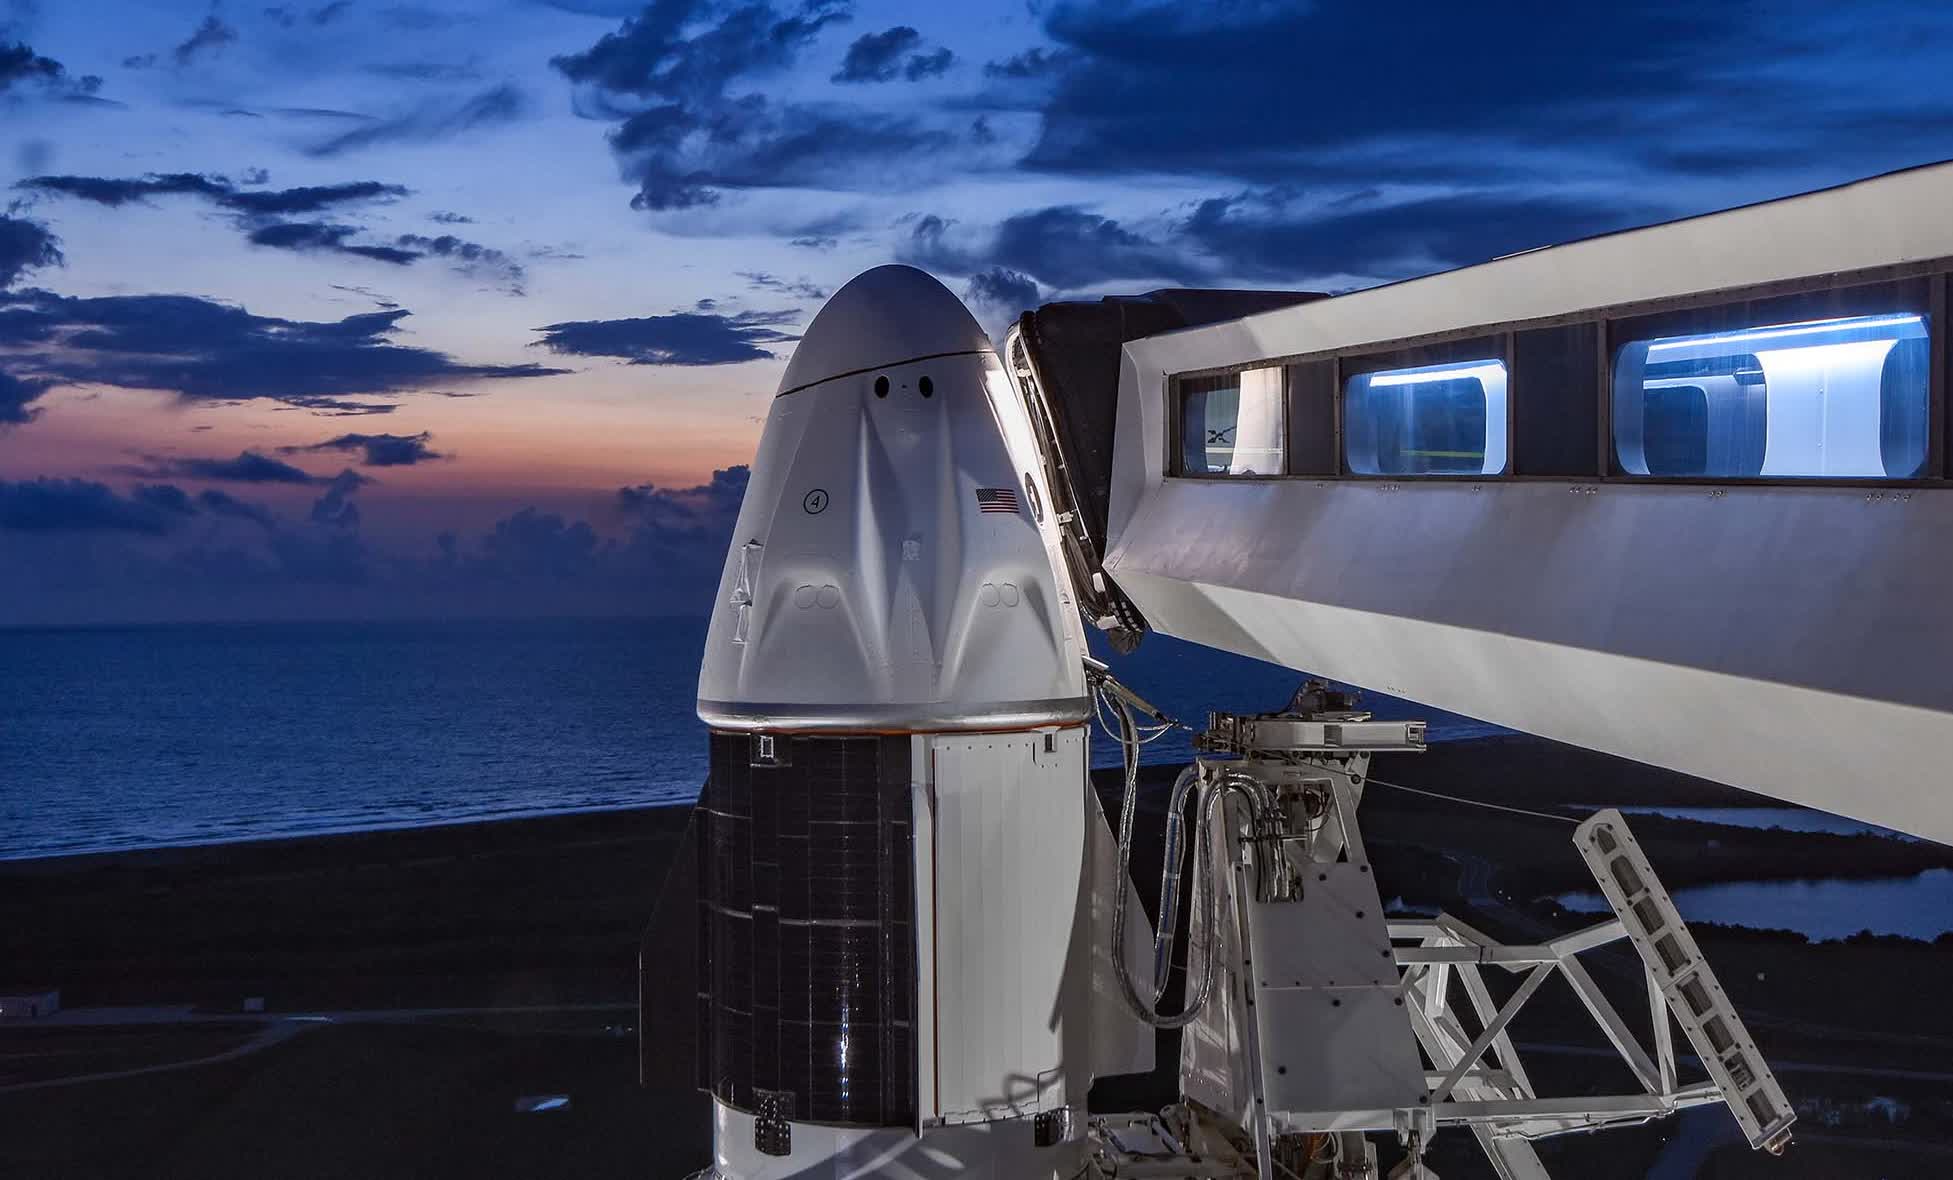 SpaceX's first all-civilian spaceflight happens tonight, here's how to watch